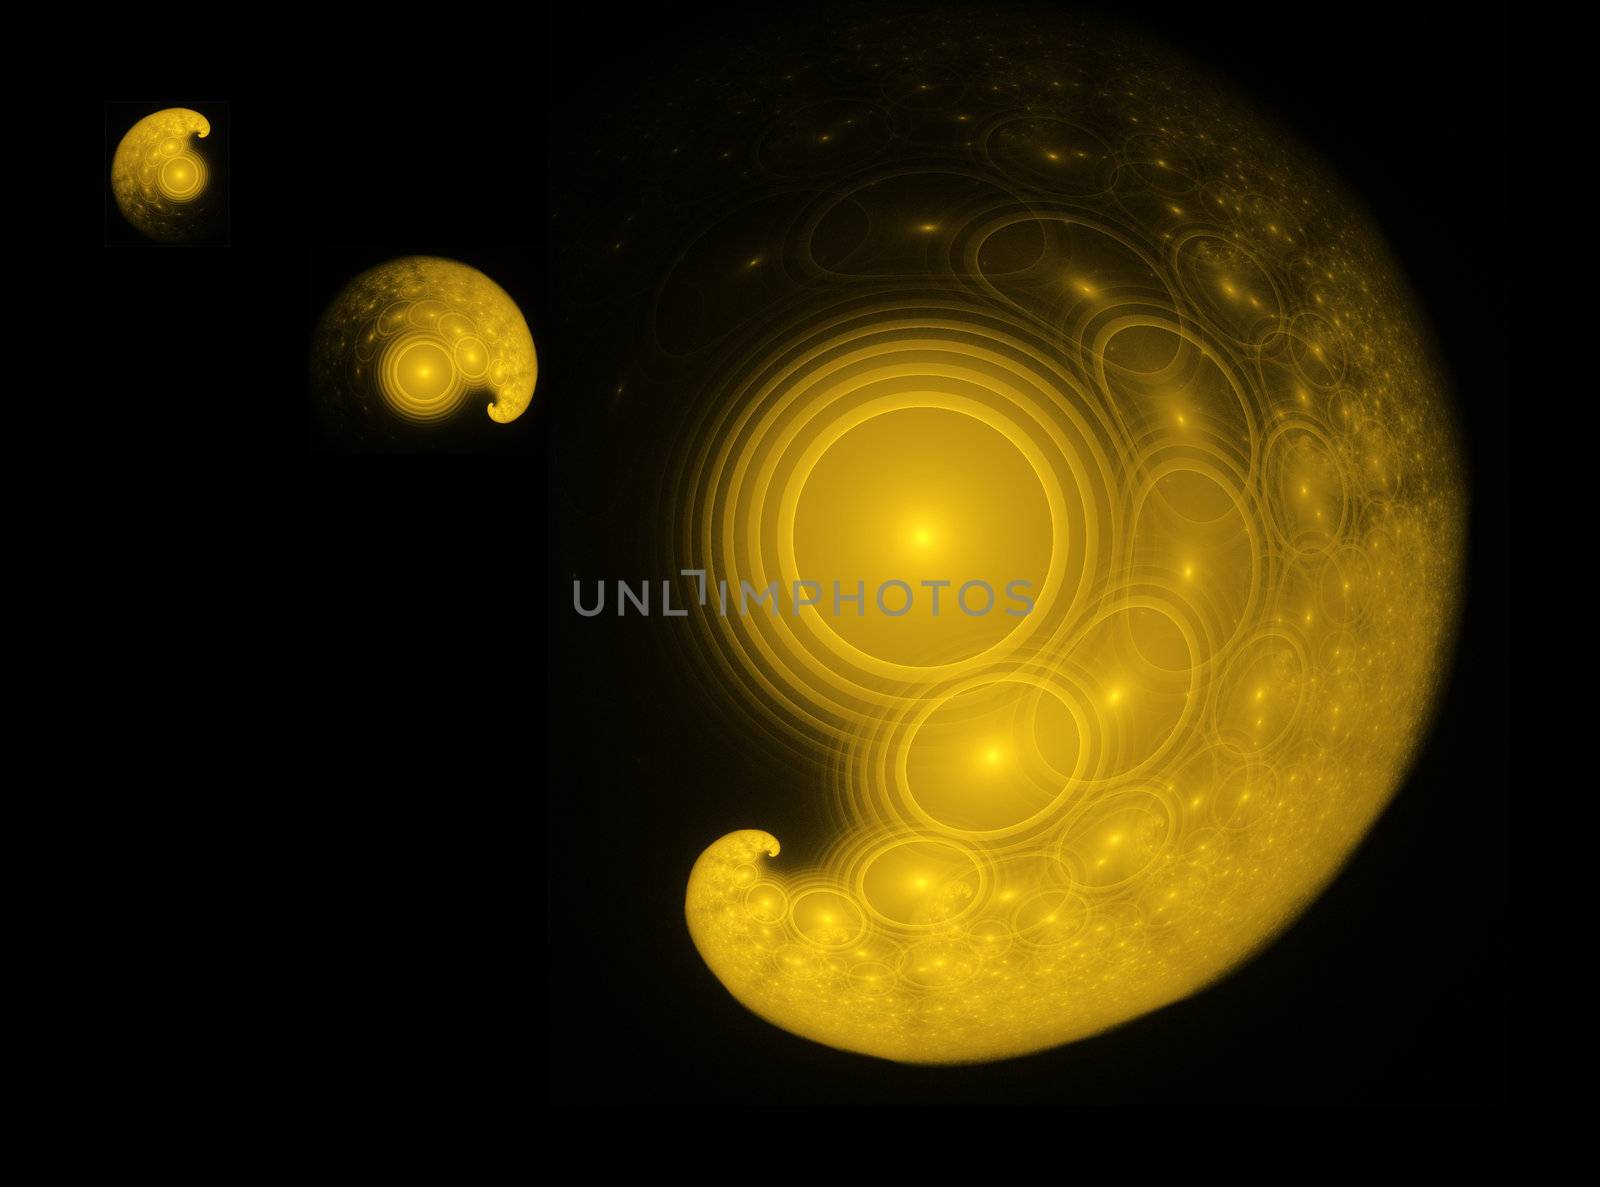 Planetary system by LiborF